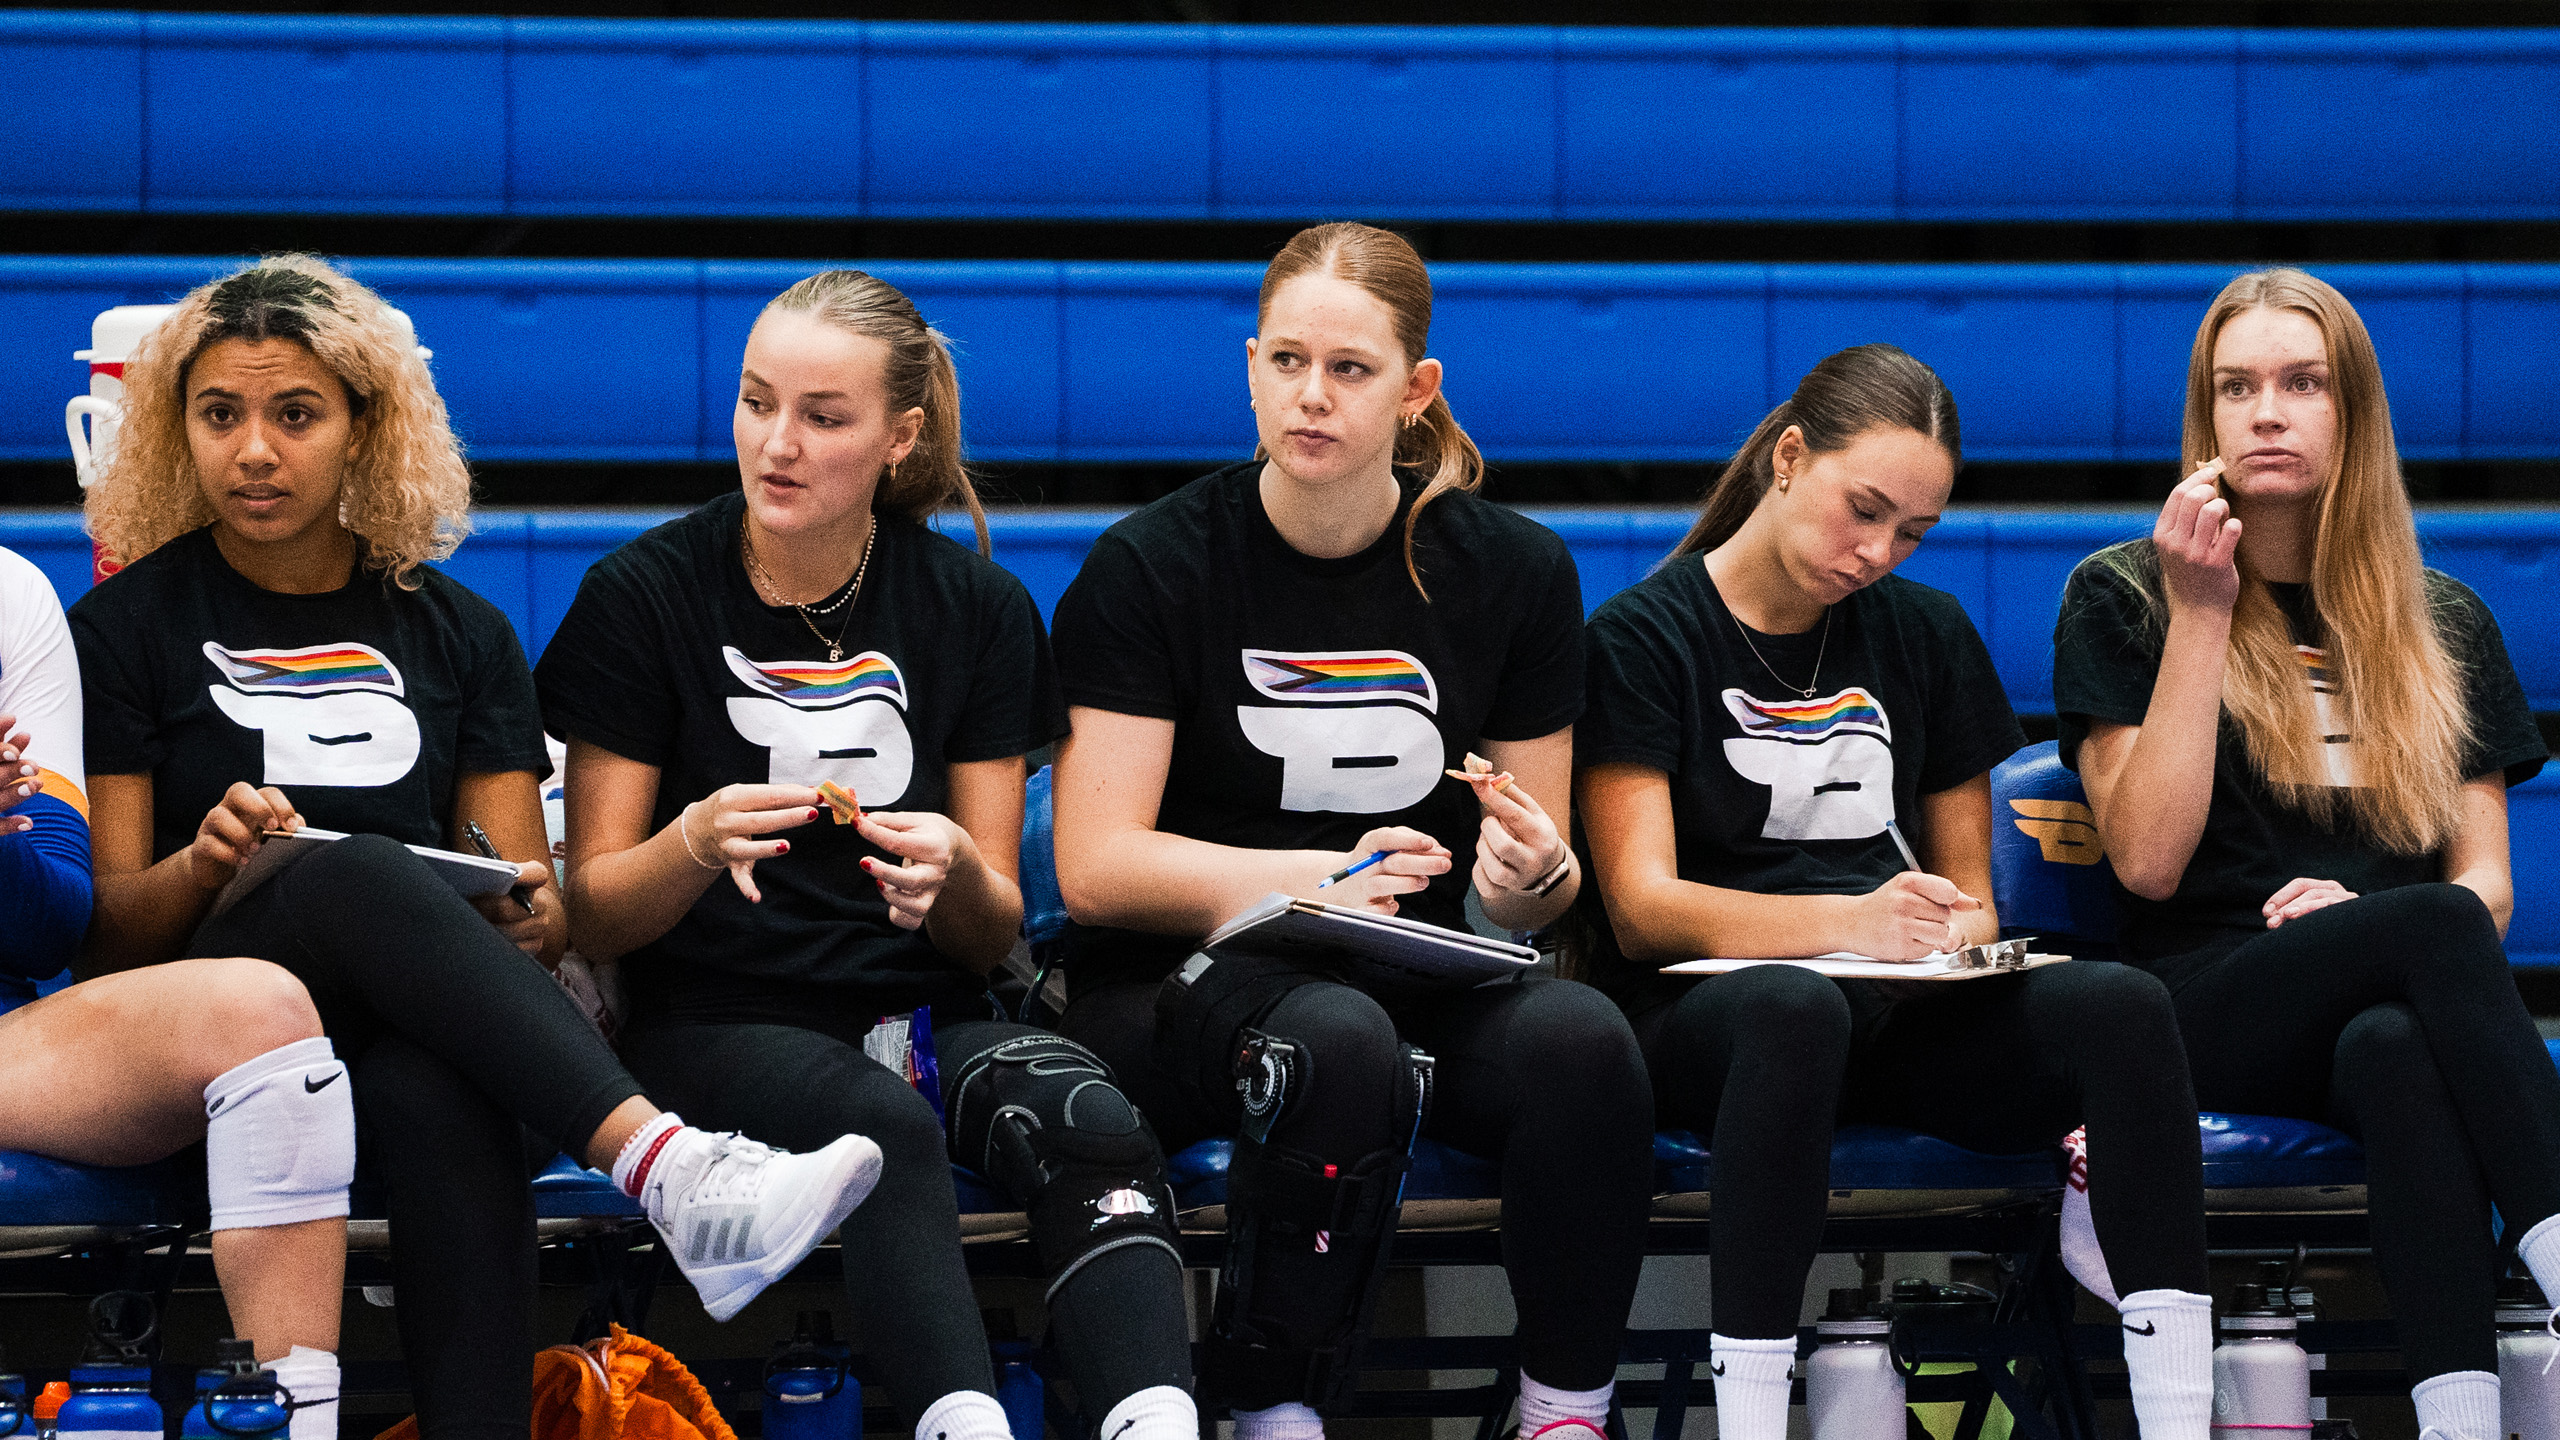 TMU women's volleyball players wear the Bold pride shirt while sitting on the bench